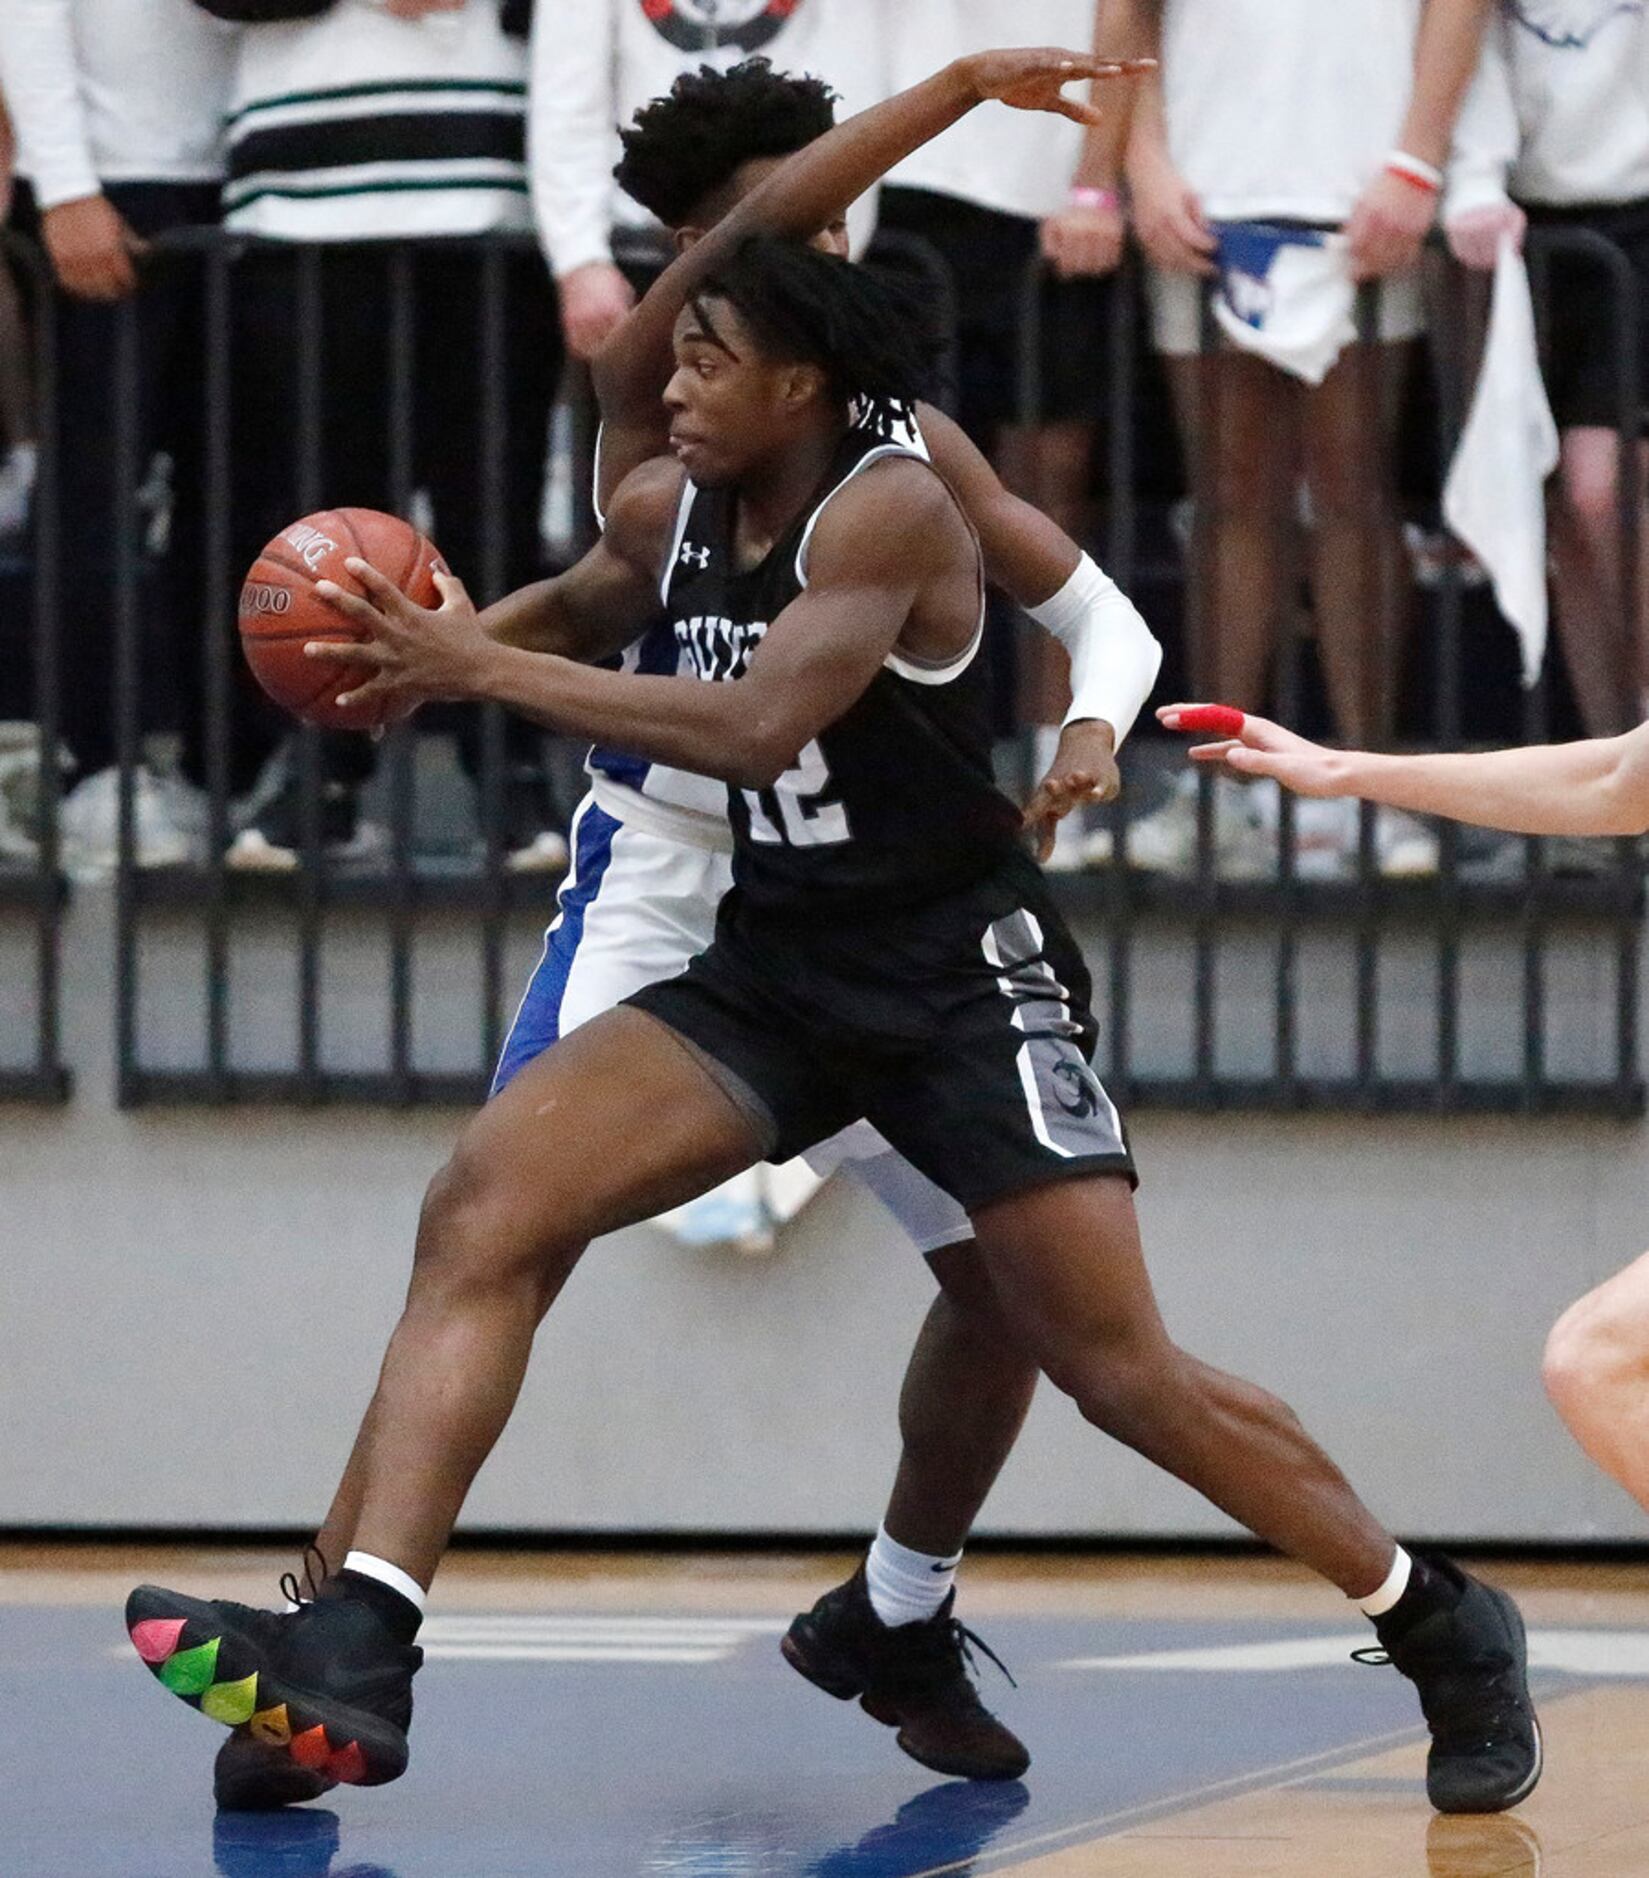 Denton Guyer High School's Amaechi Chukwu (12) attempts a move to the basket while Allen...